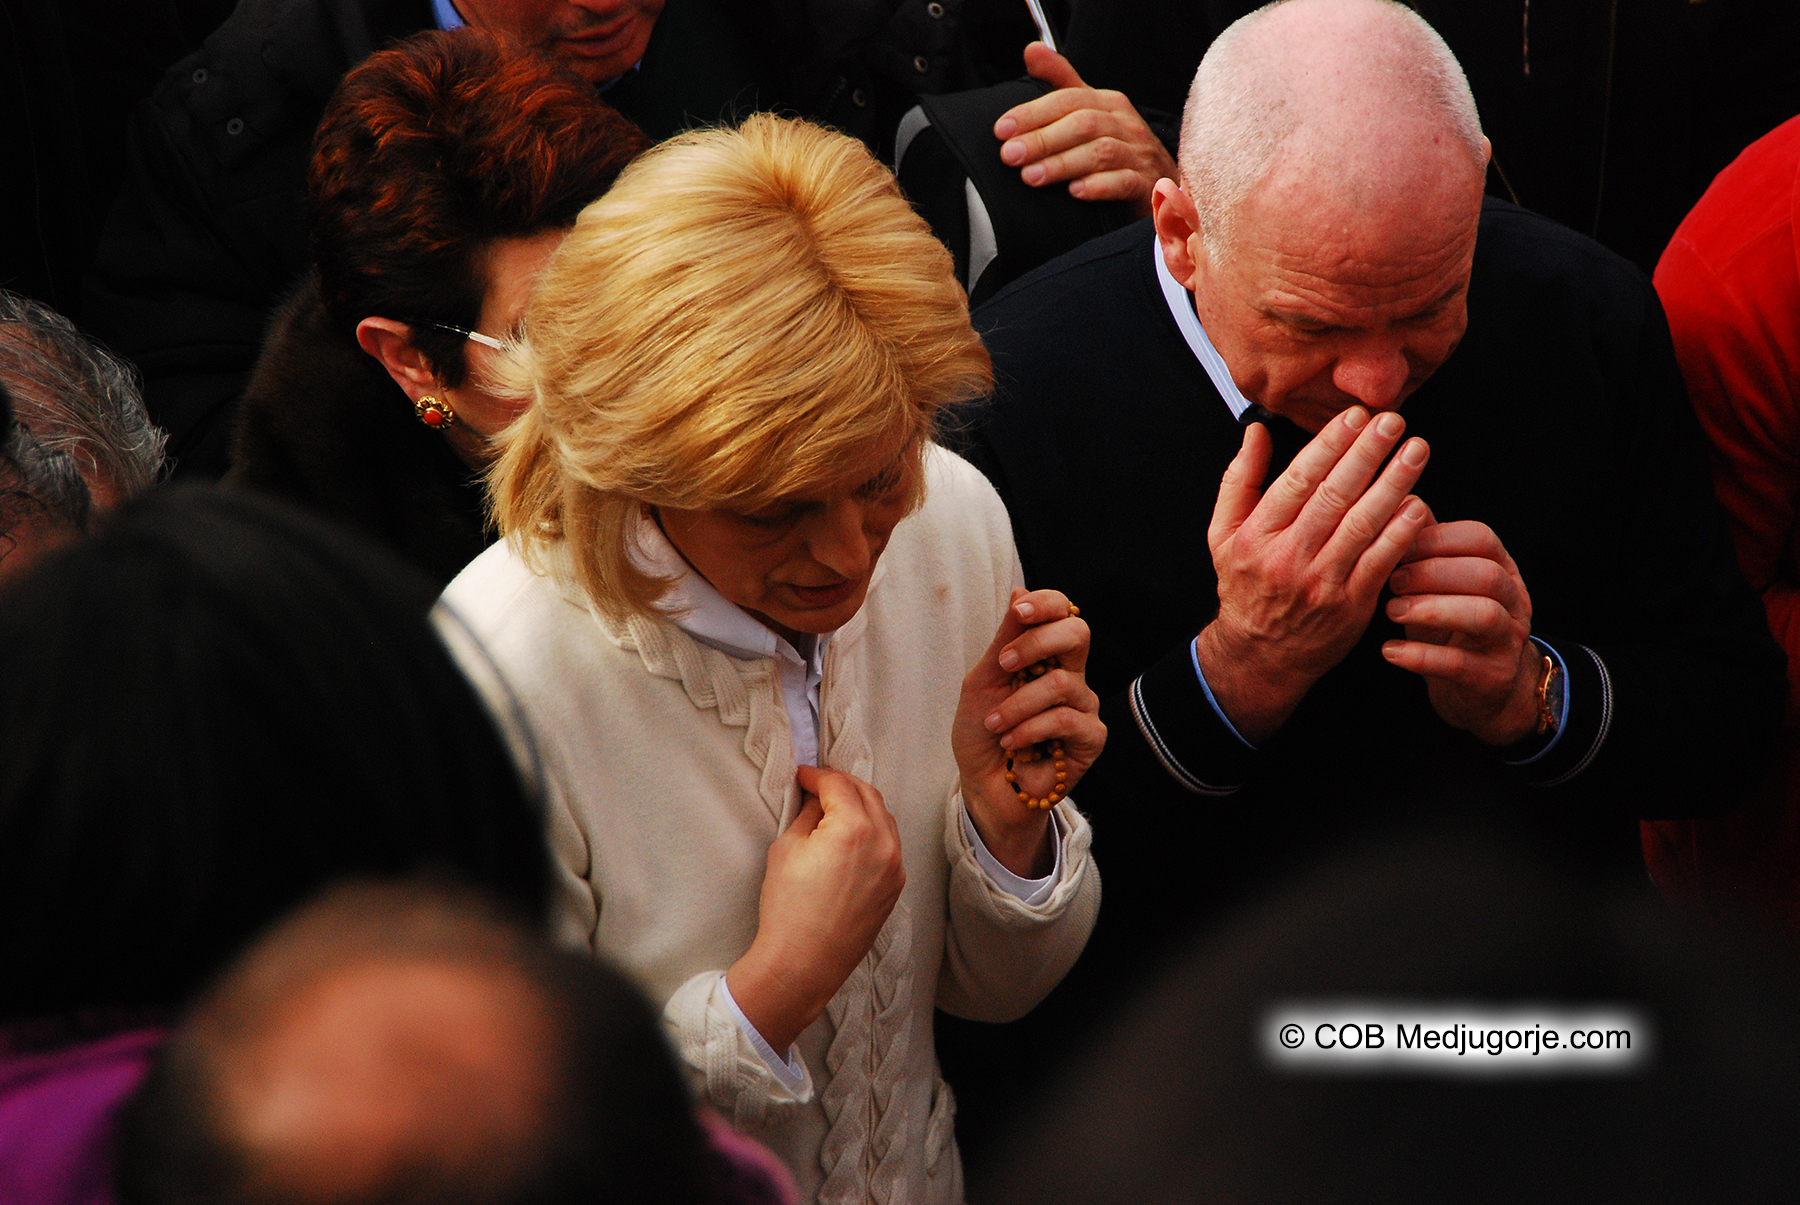 Medjugorje visionary Mirjana after apparition on march 18, 2010